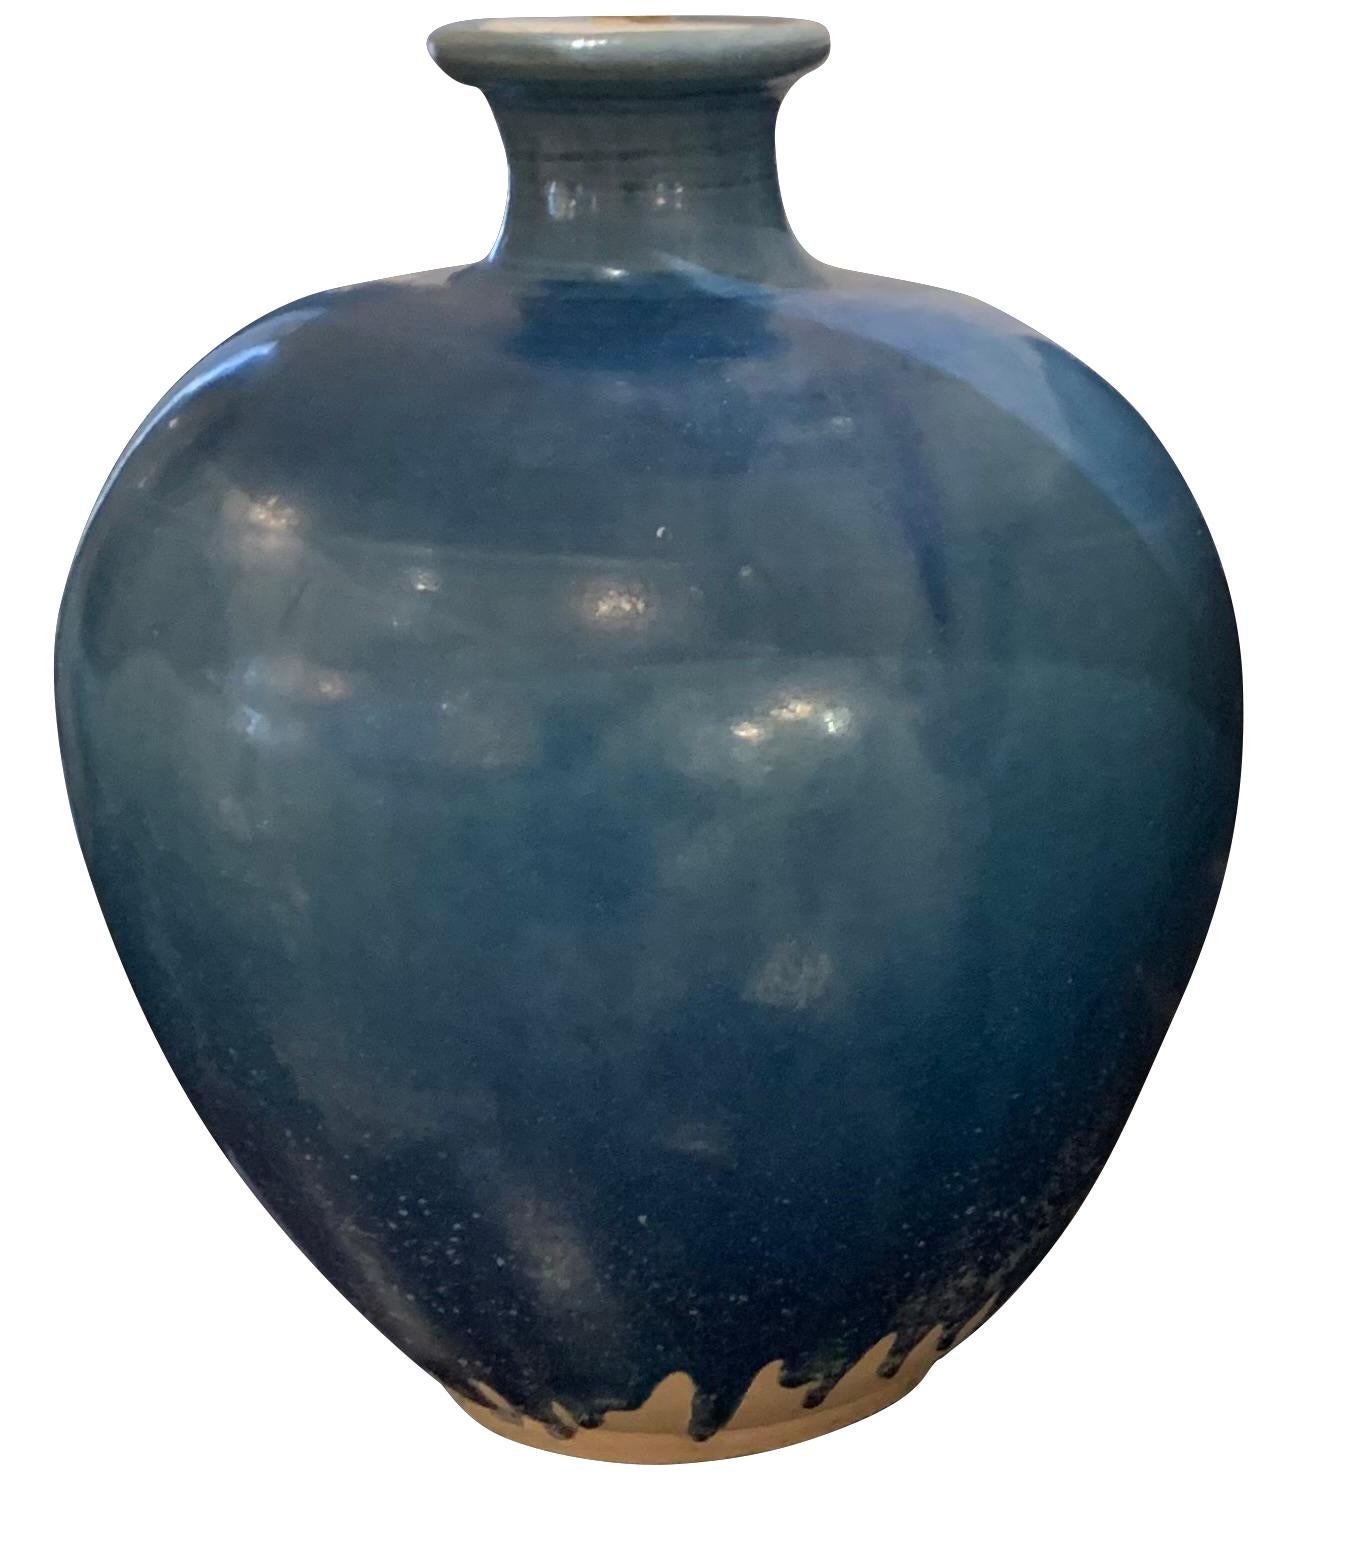 Contemporary Chinese pair deep blue glazed lamps with ginger jar shape.
New Belgian linen shades.
Base 9